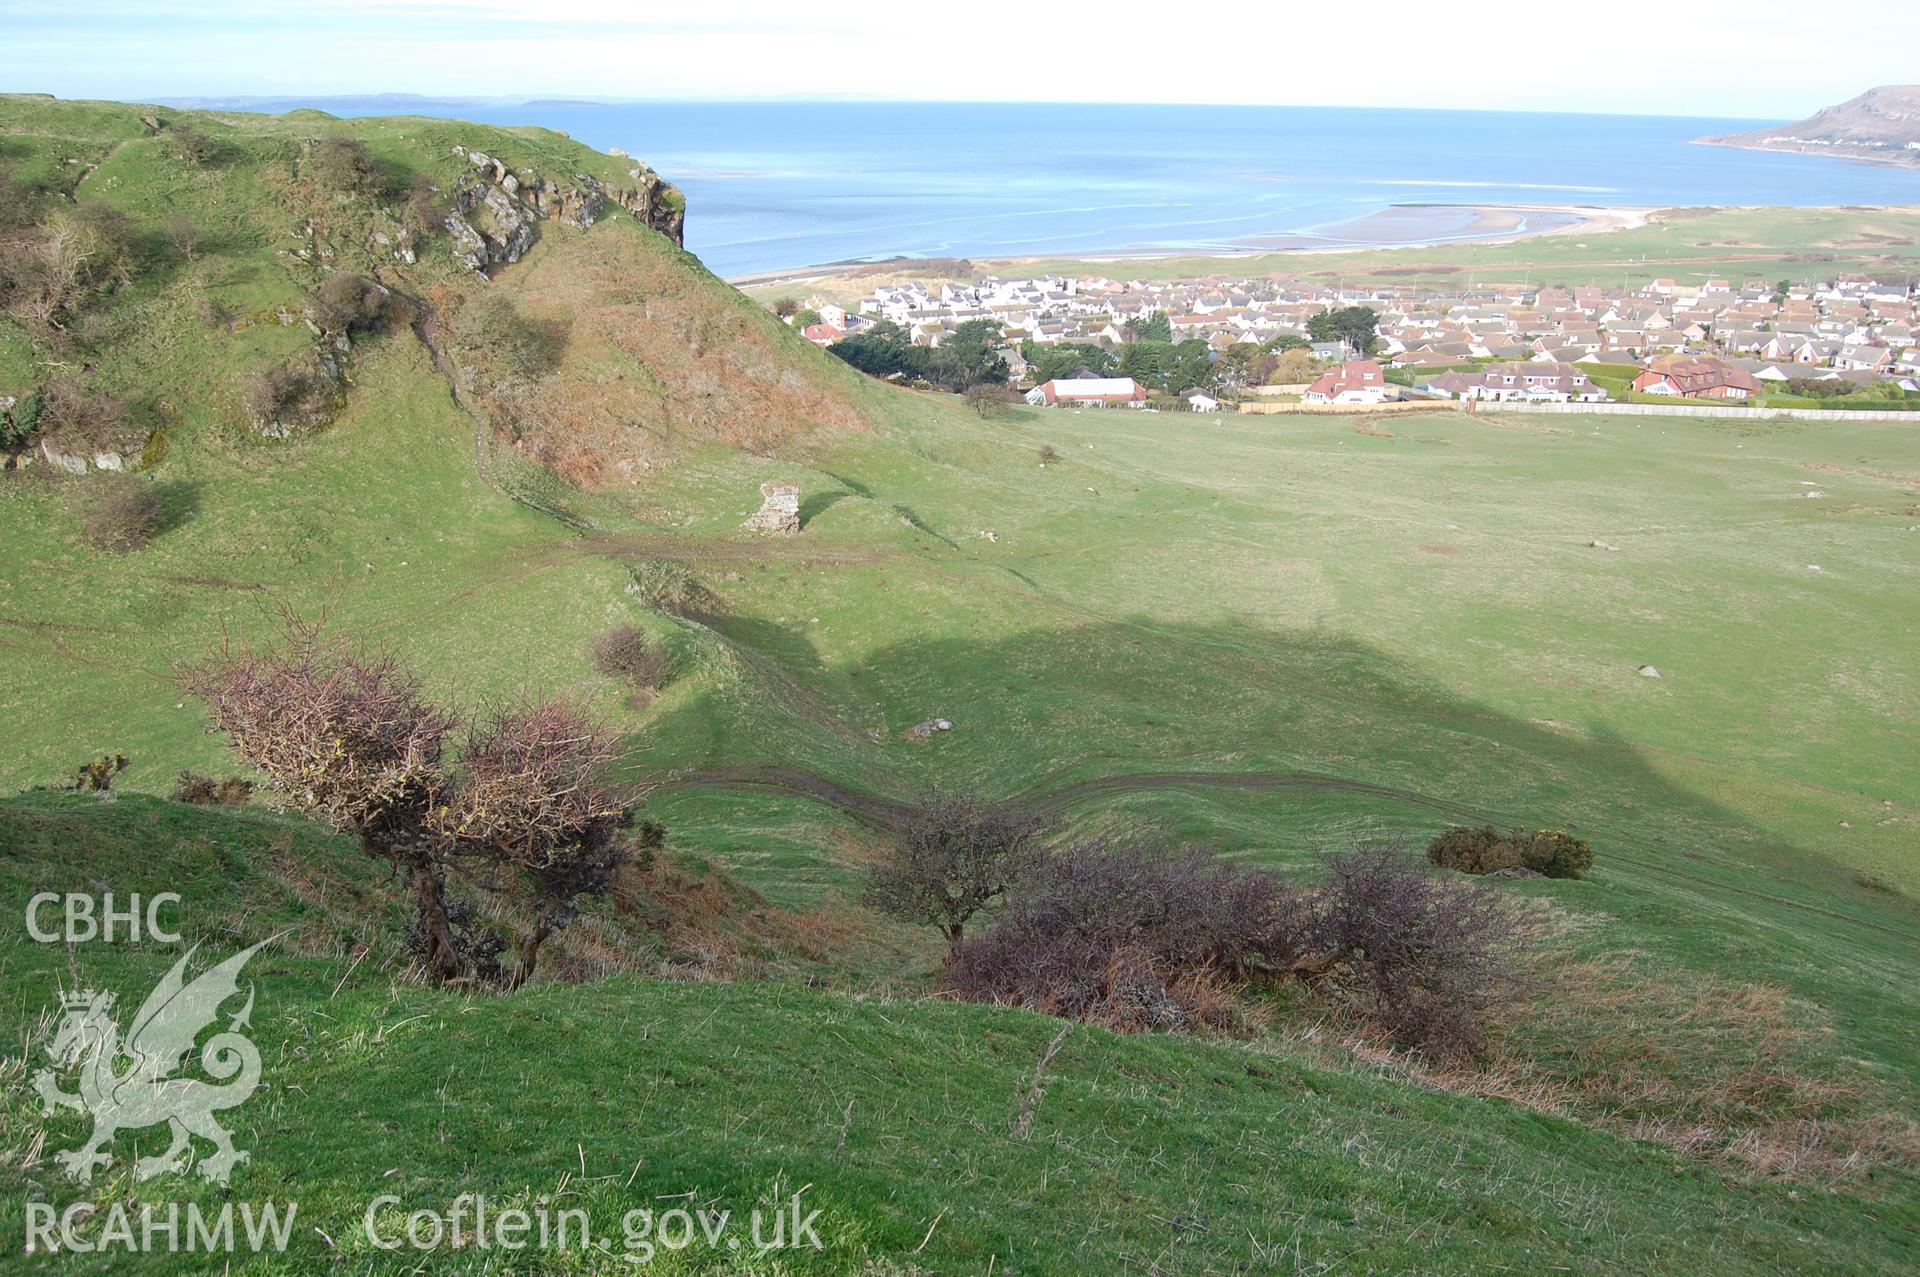 Digital photograph from an archaeological assessment of Deganwy Castle, carried out by Gwynedd Archaeological Trust, 2009. View down main N ditch from Mansel's Tower.